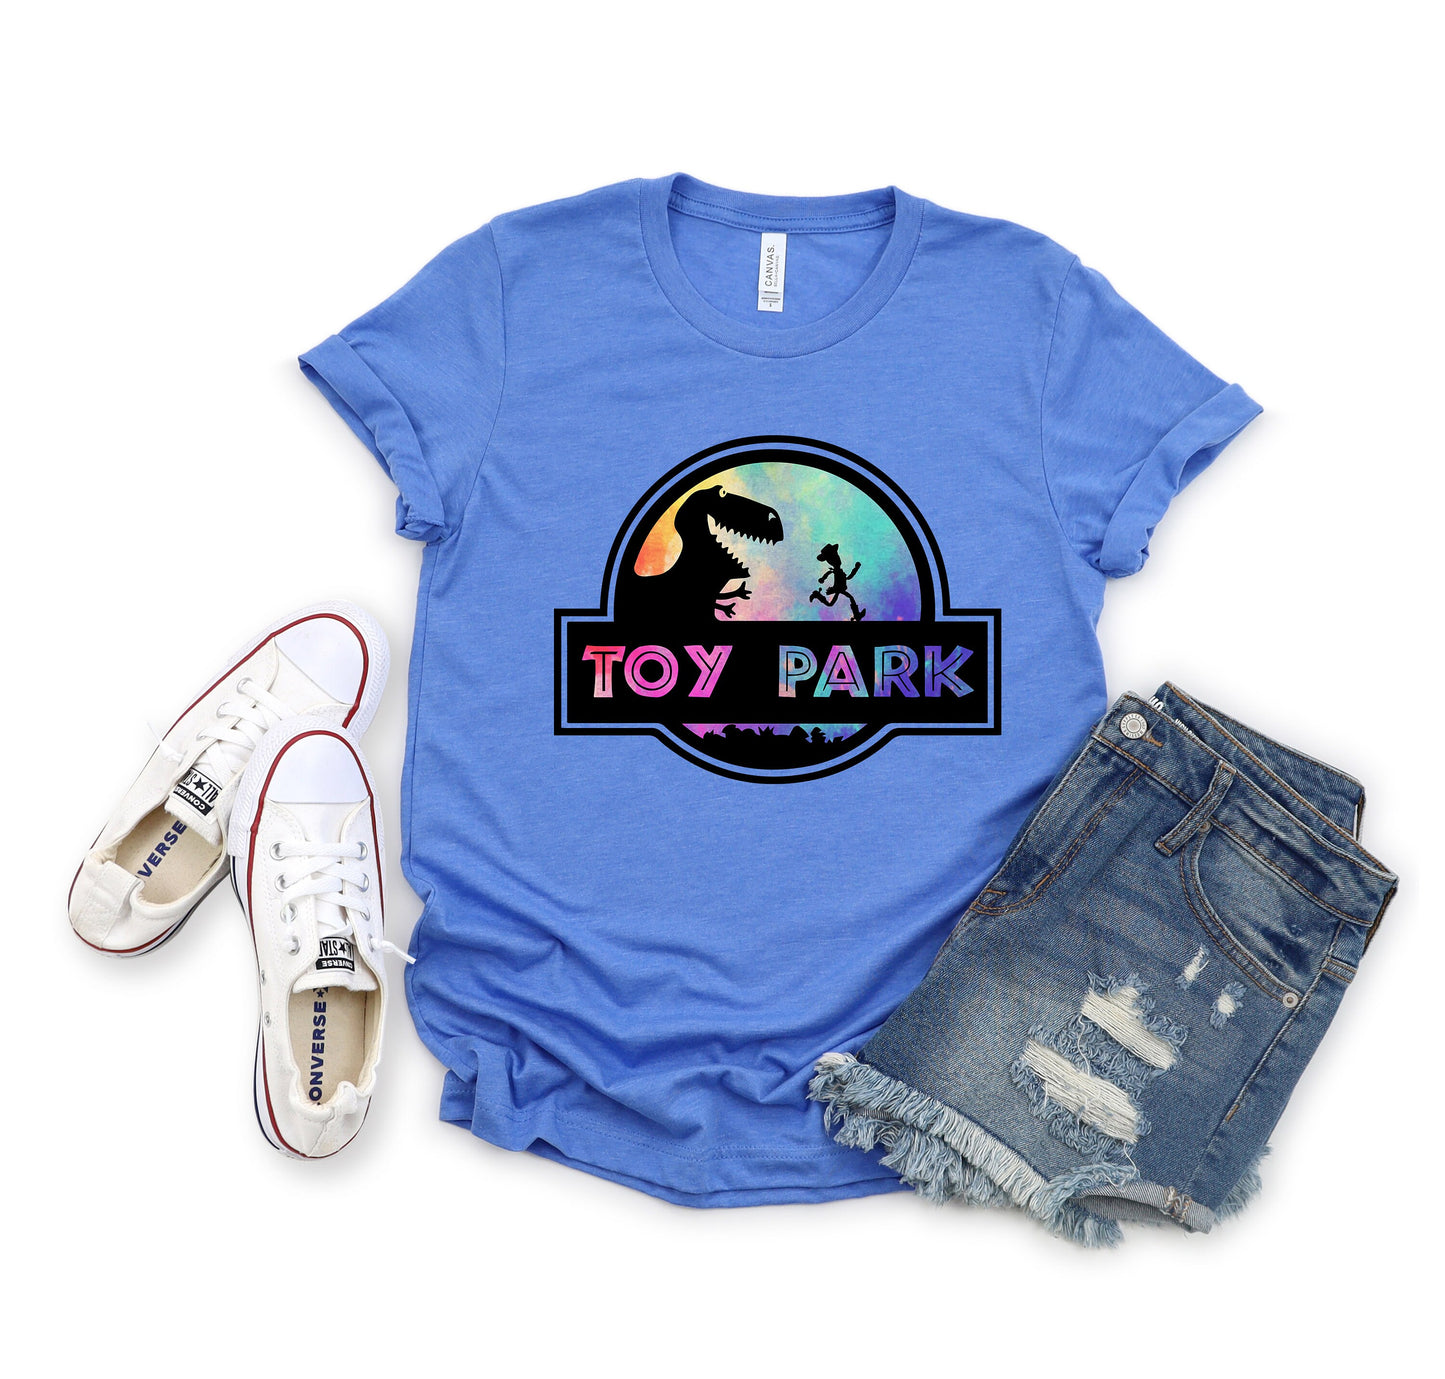 Toy Jurassic Park Funny and Cute Story Shirts| UNISEX Relaxed Jersey T-Shirt for Women